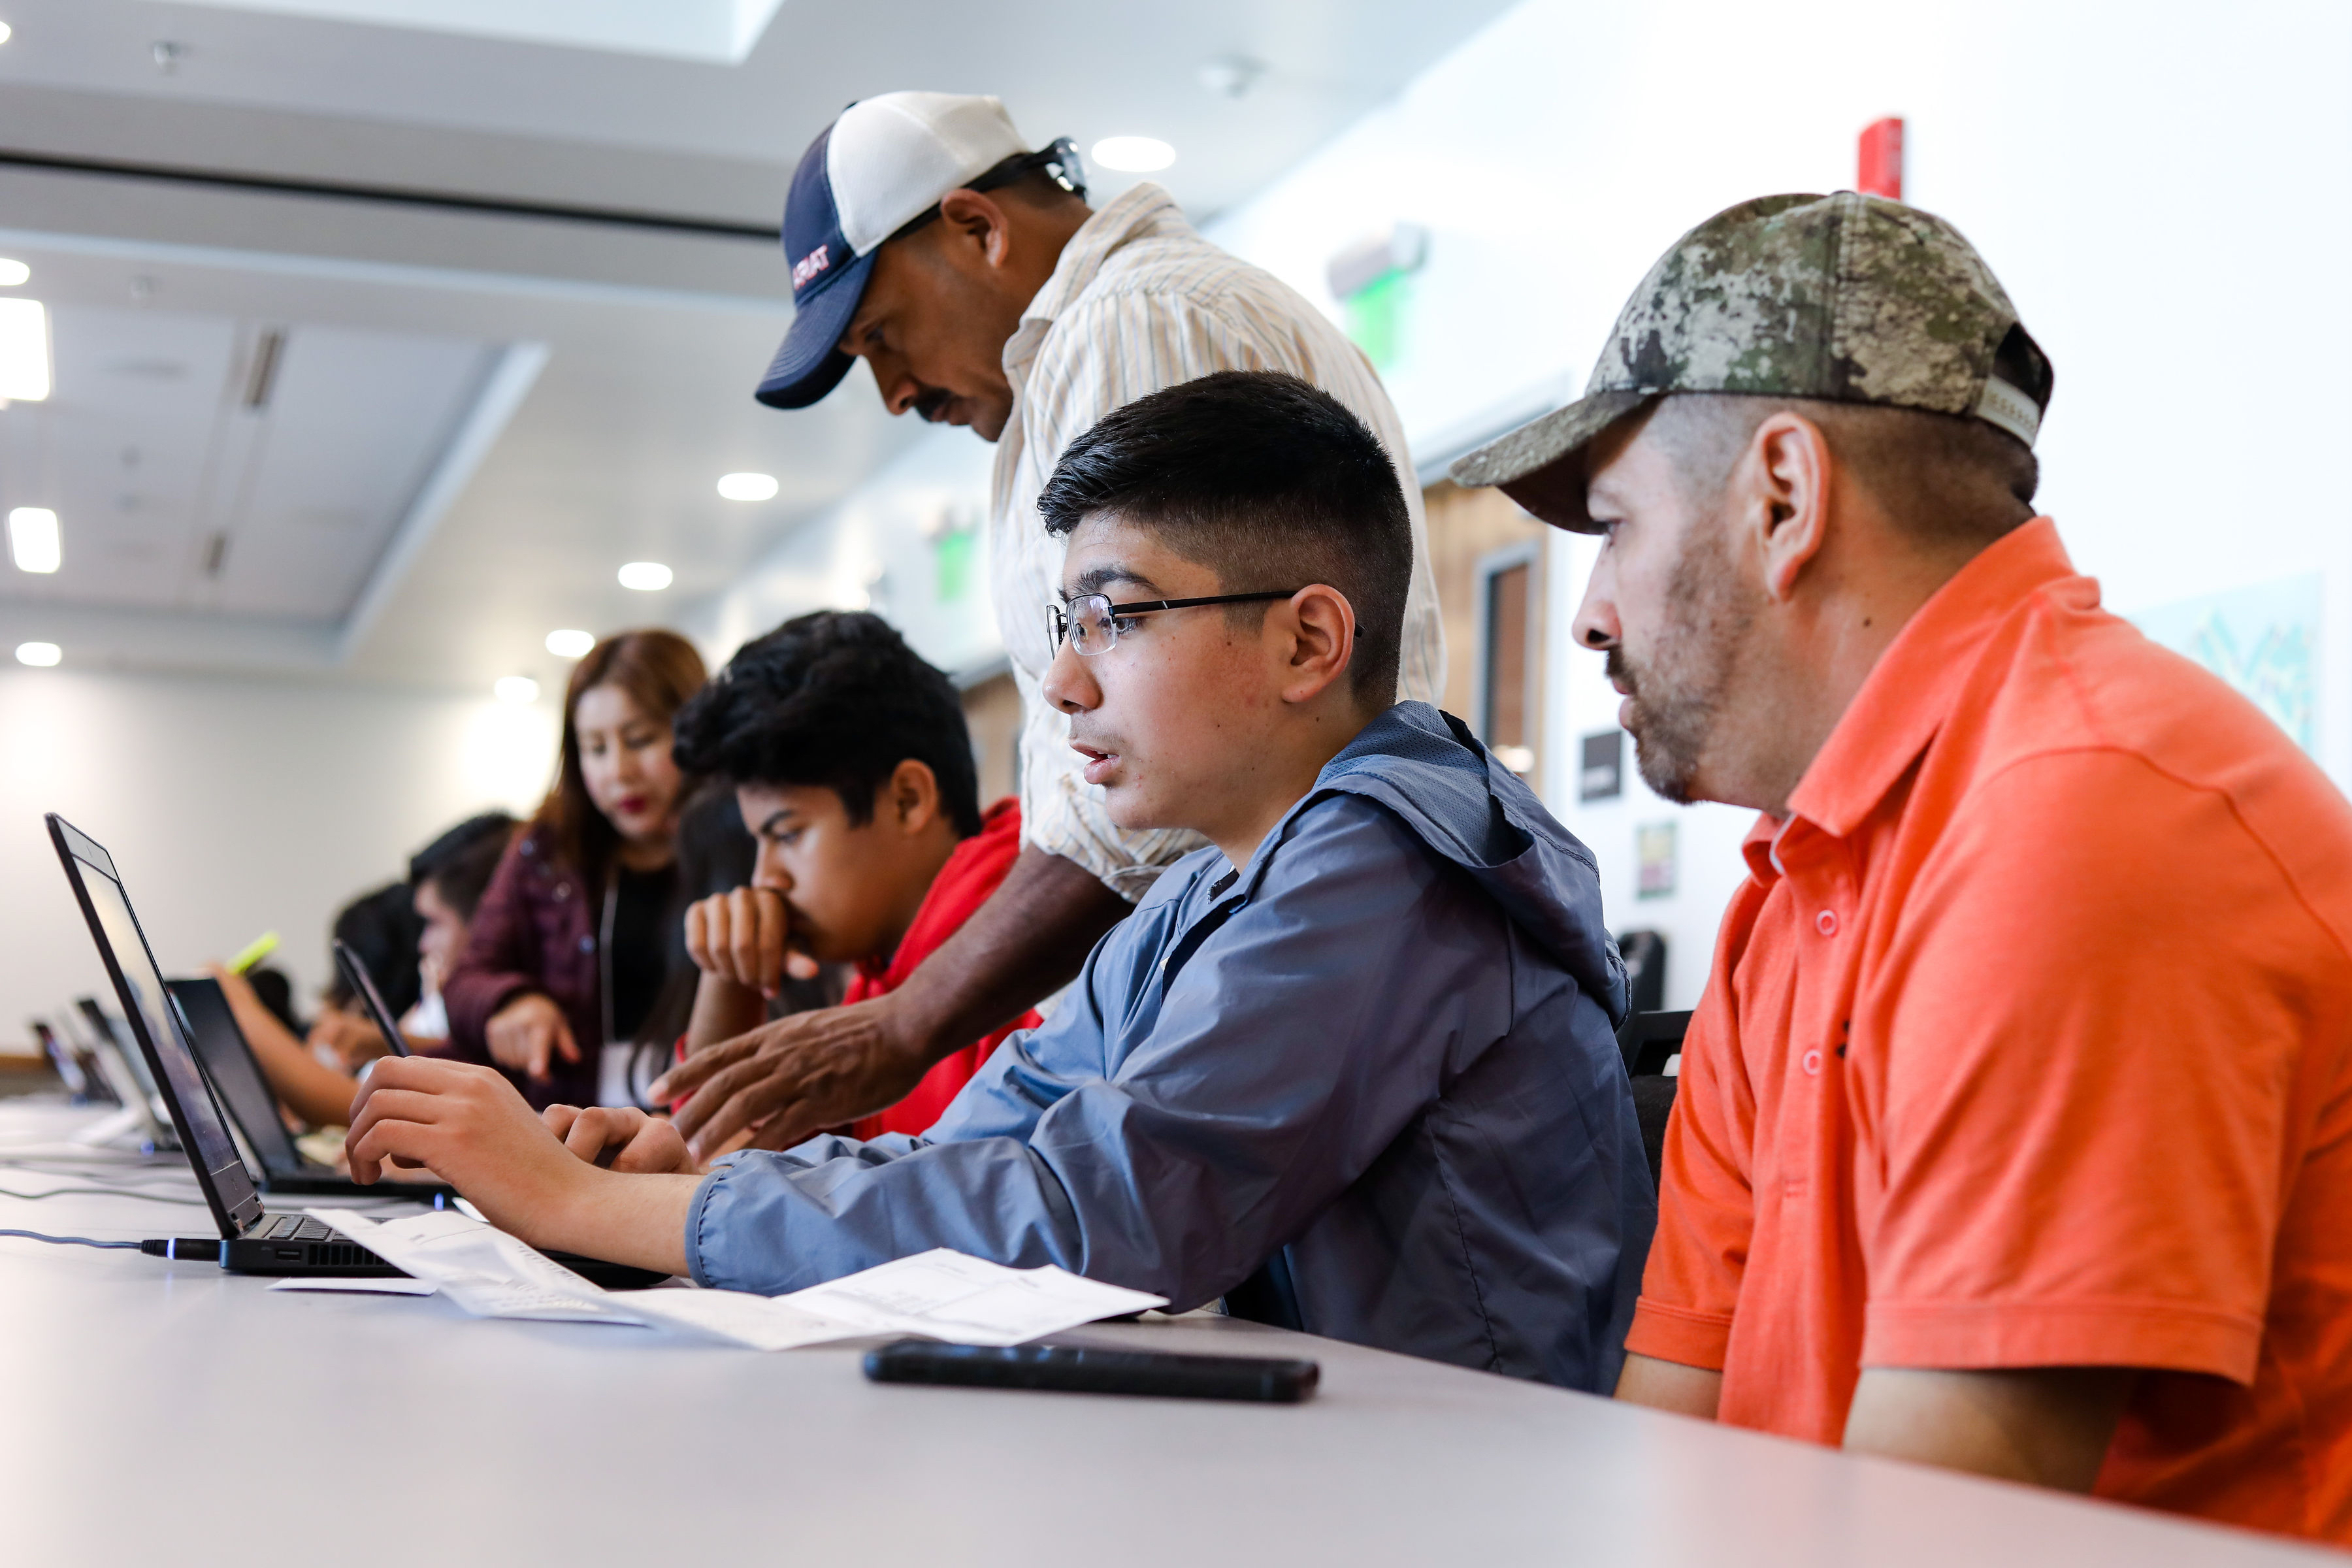 Participants in the 2019 Feria de Educación fair work on a laptop to access resources for navigating the California education system.